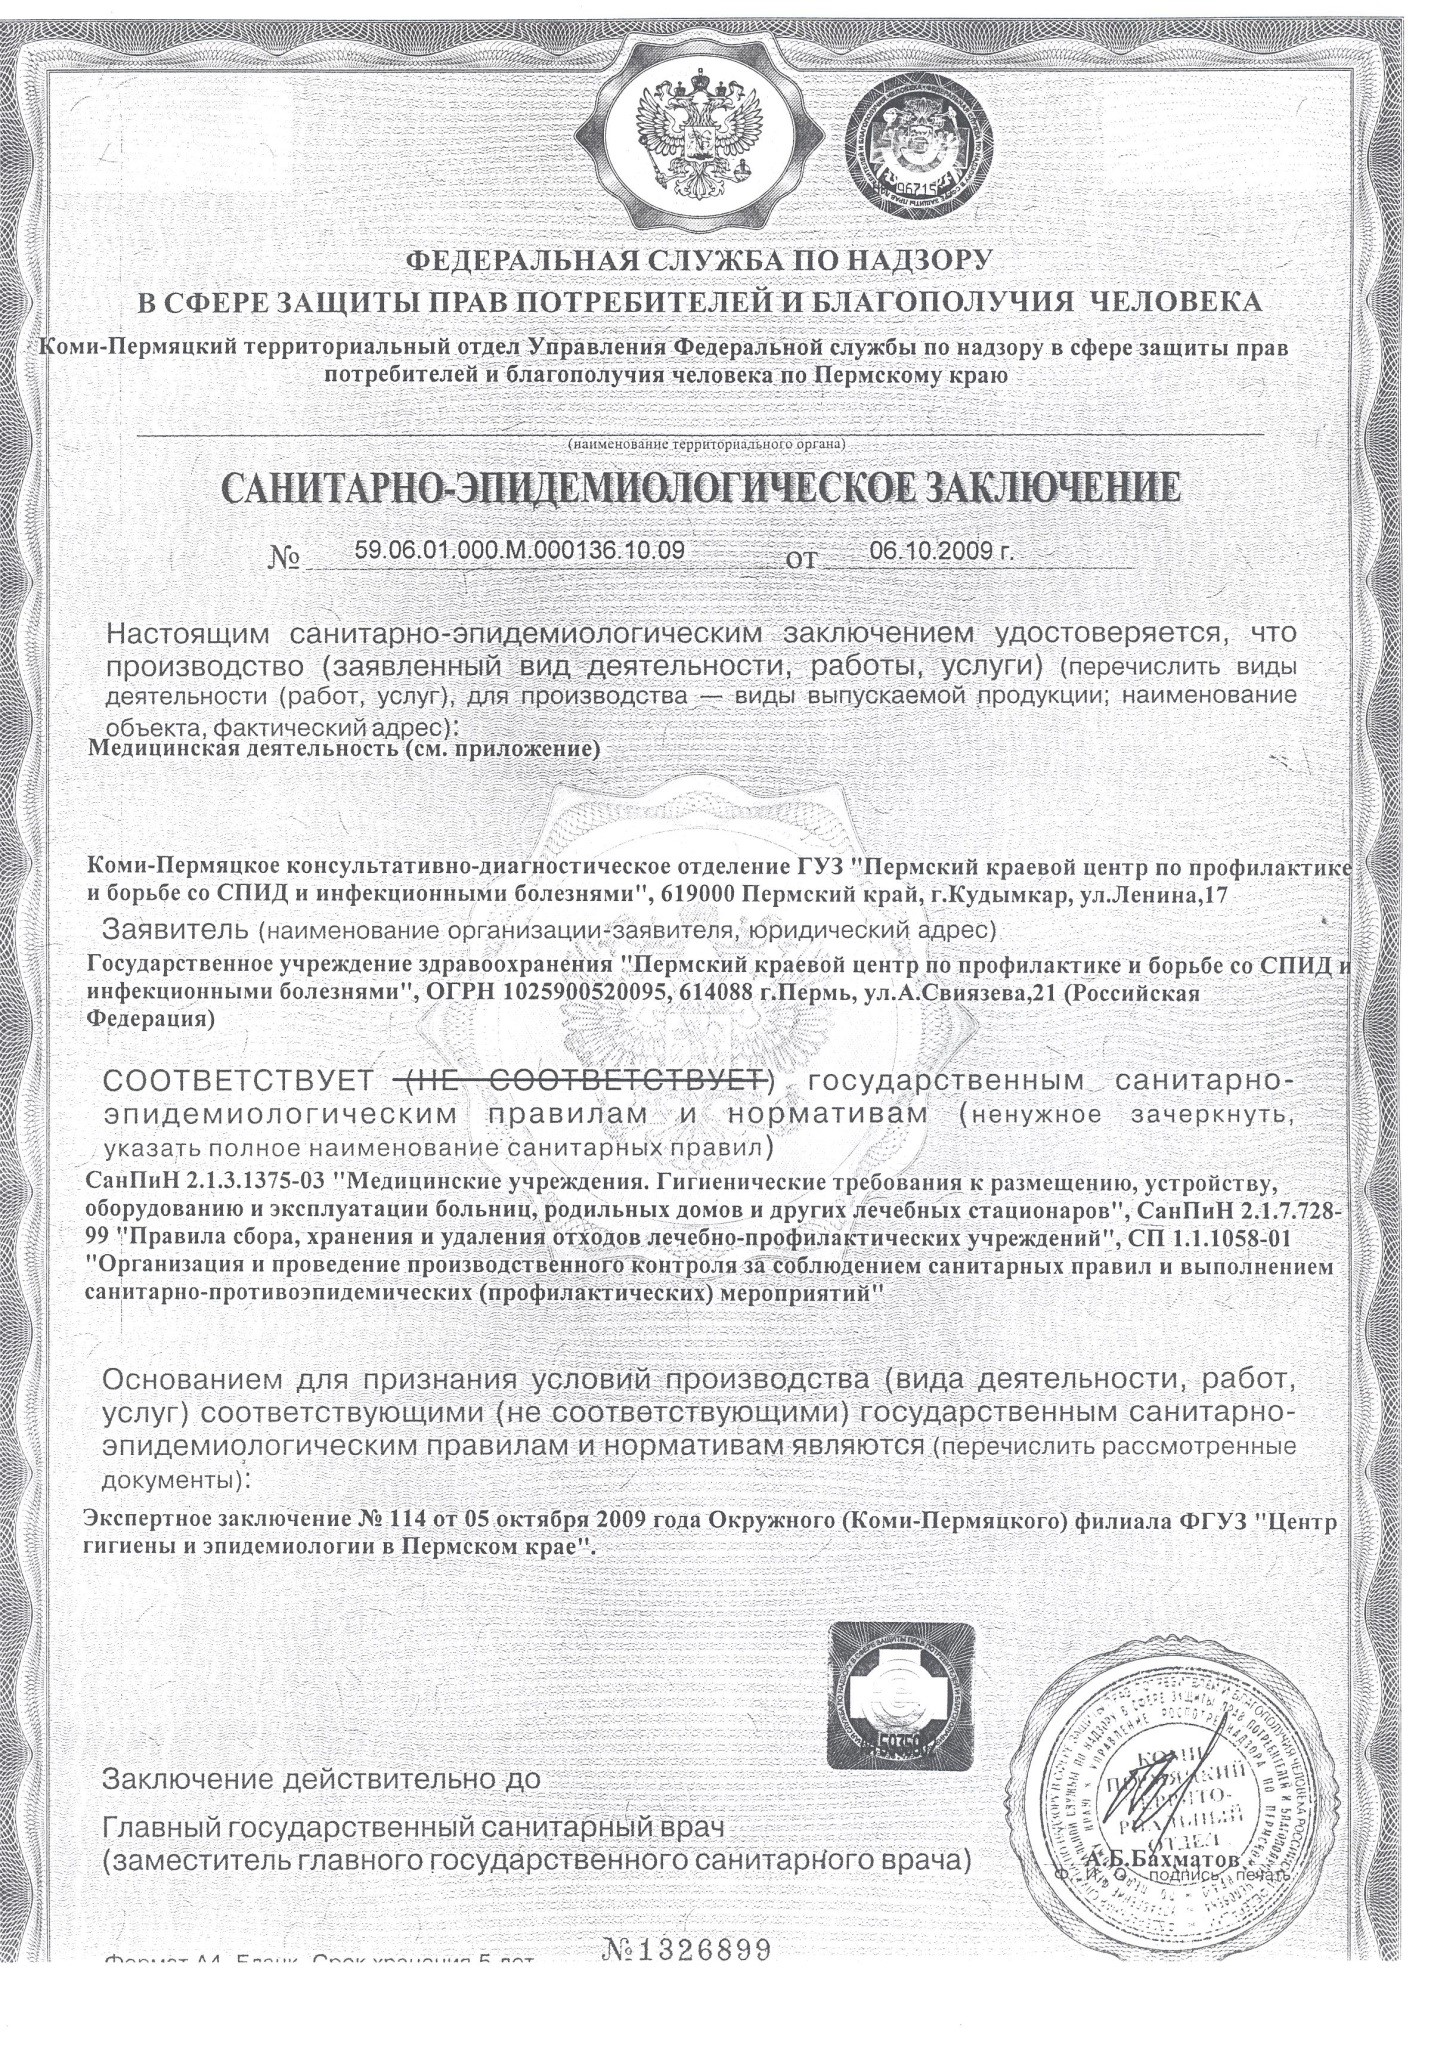 Sanitary-epidemiological certificate10